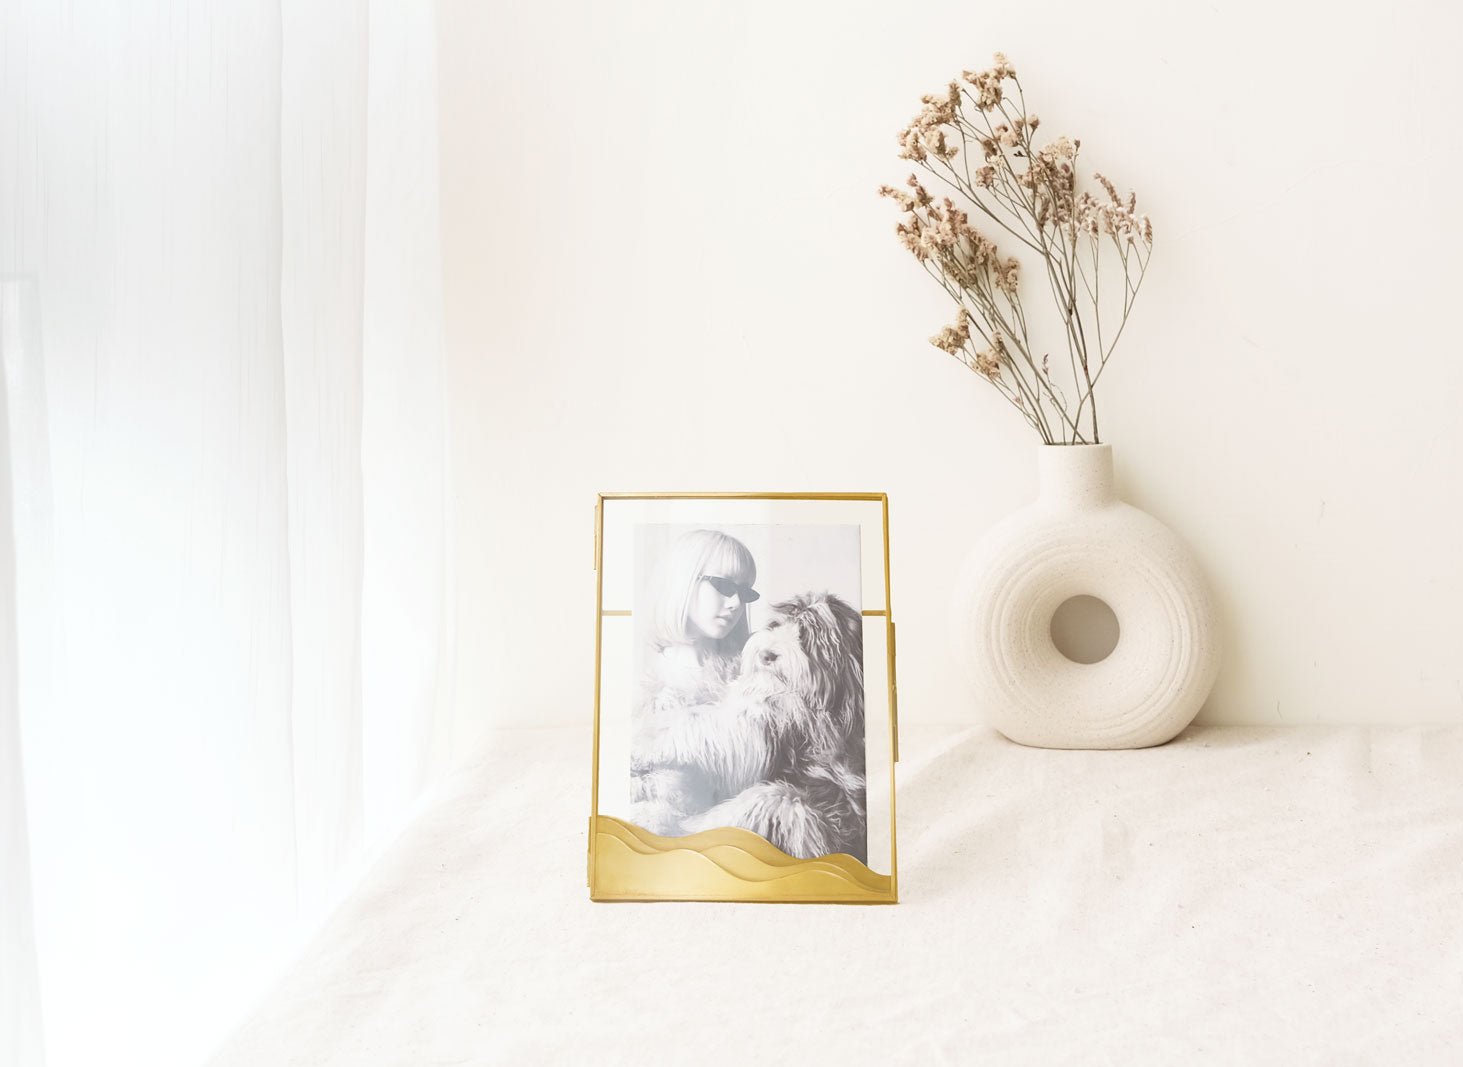 FONDAZZA 6x4 Wall Hanging Picture Frame, Gold Brass Decor, Glass Backing  with Color Print, Horizontal/Landscape Only, Floating Photo Frame (Pale